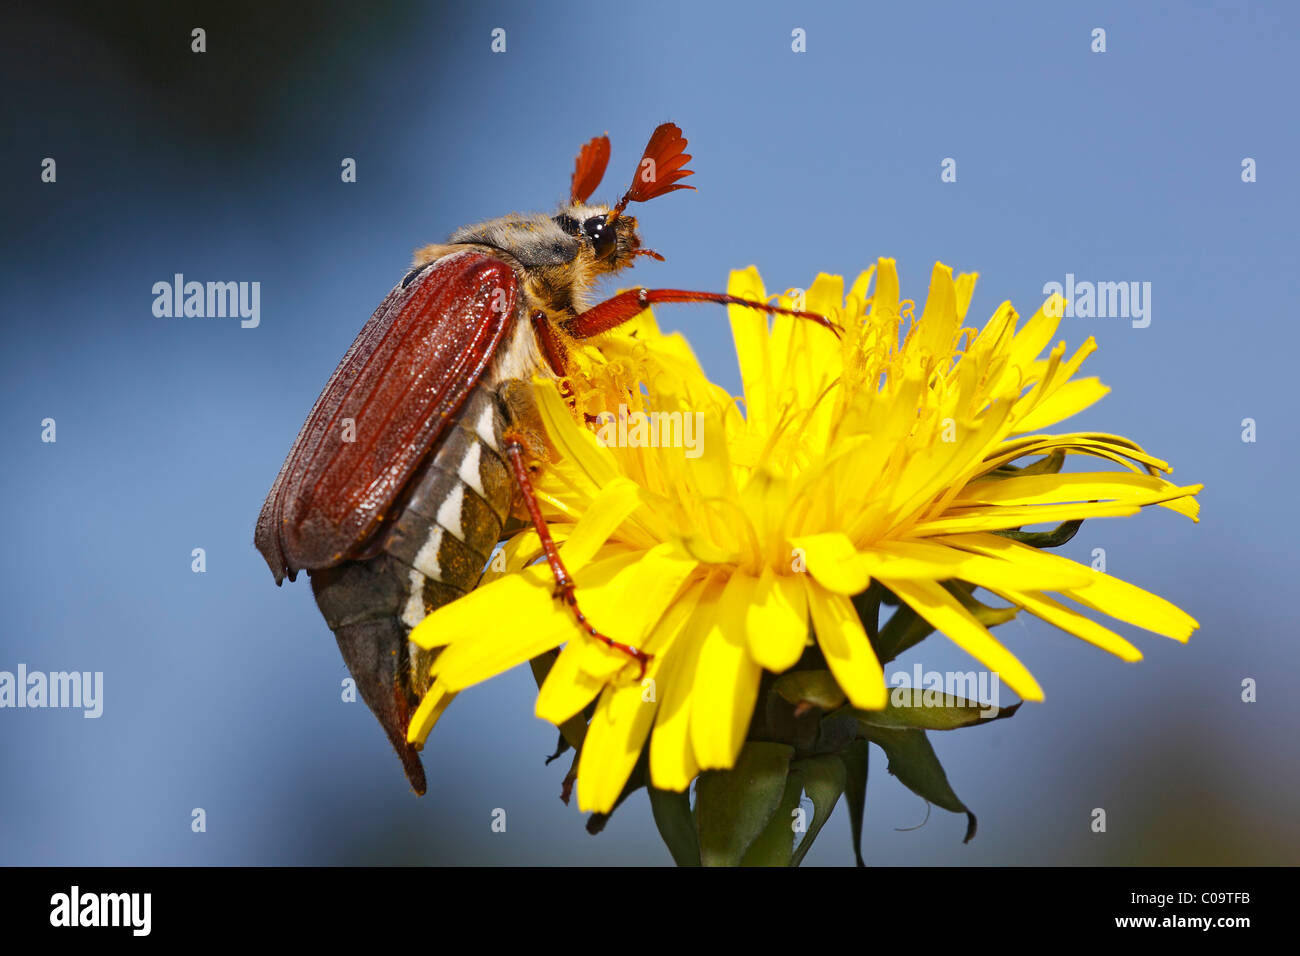 European cockchafer beetle or May beetle (Melolontha melolontha) on a dandelion flower (Taraxacum officinale) Stock Photo